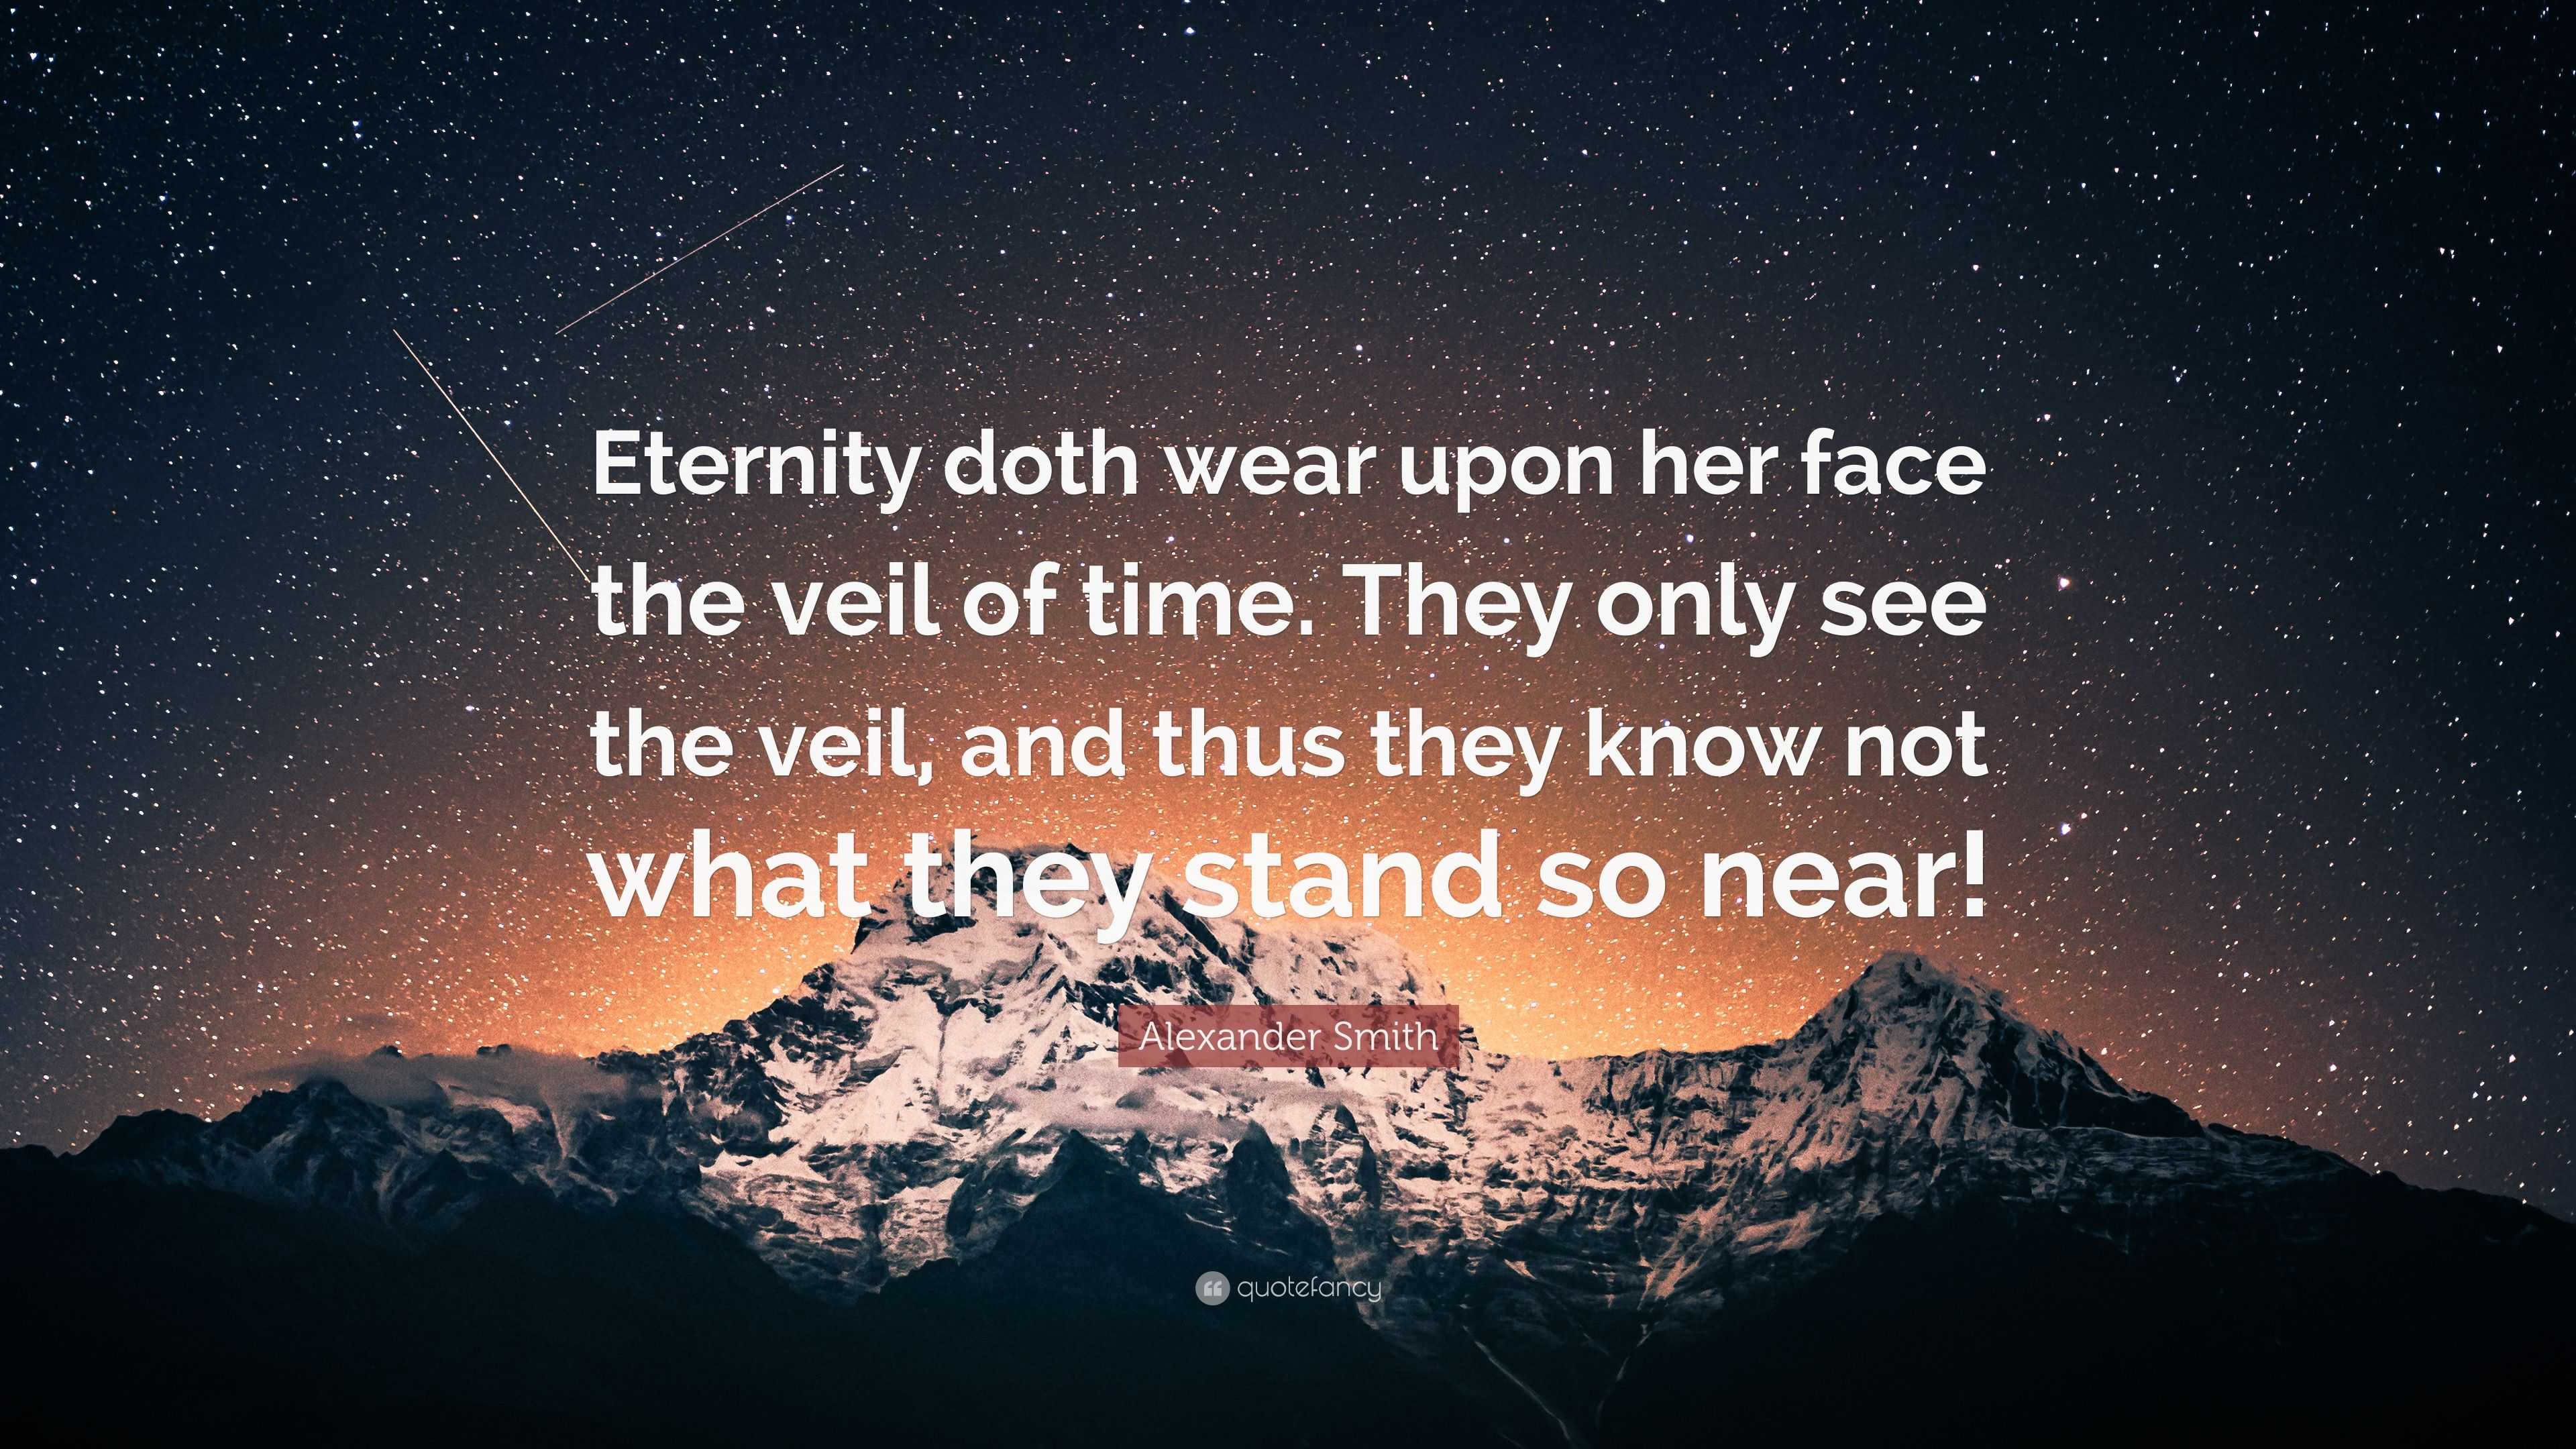 Alexander Smith Quote: “Eternity doth wear upon her face the veil of time.  They only see the veil, and thus they know not what they stand so nea...”